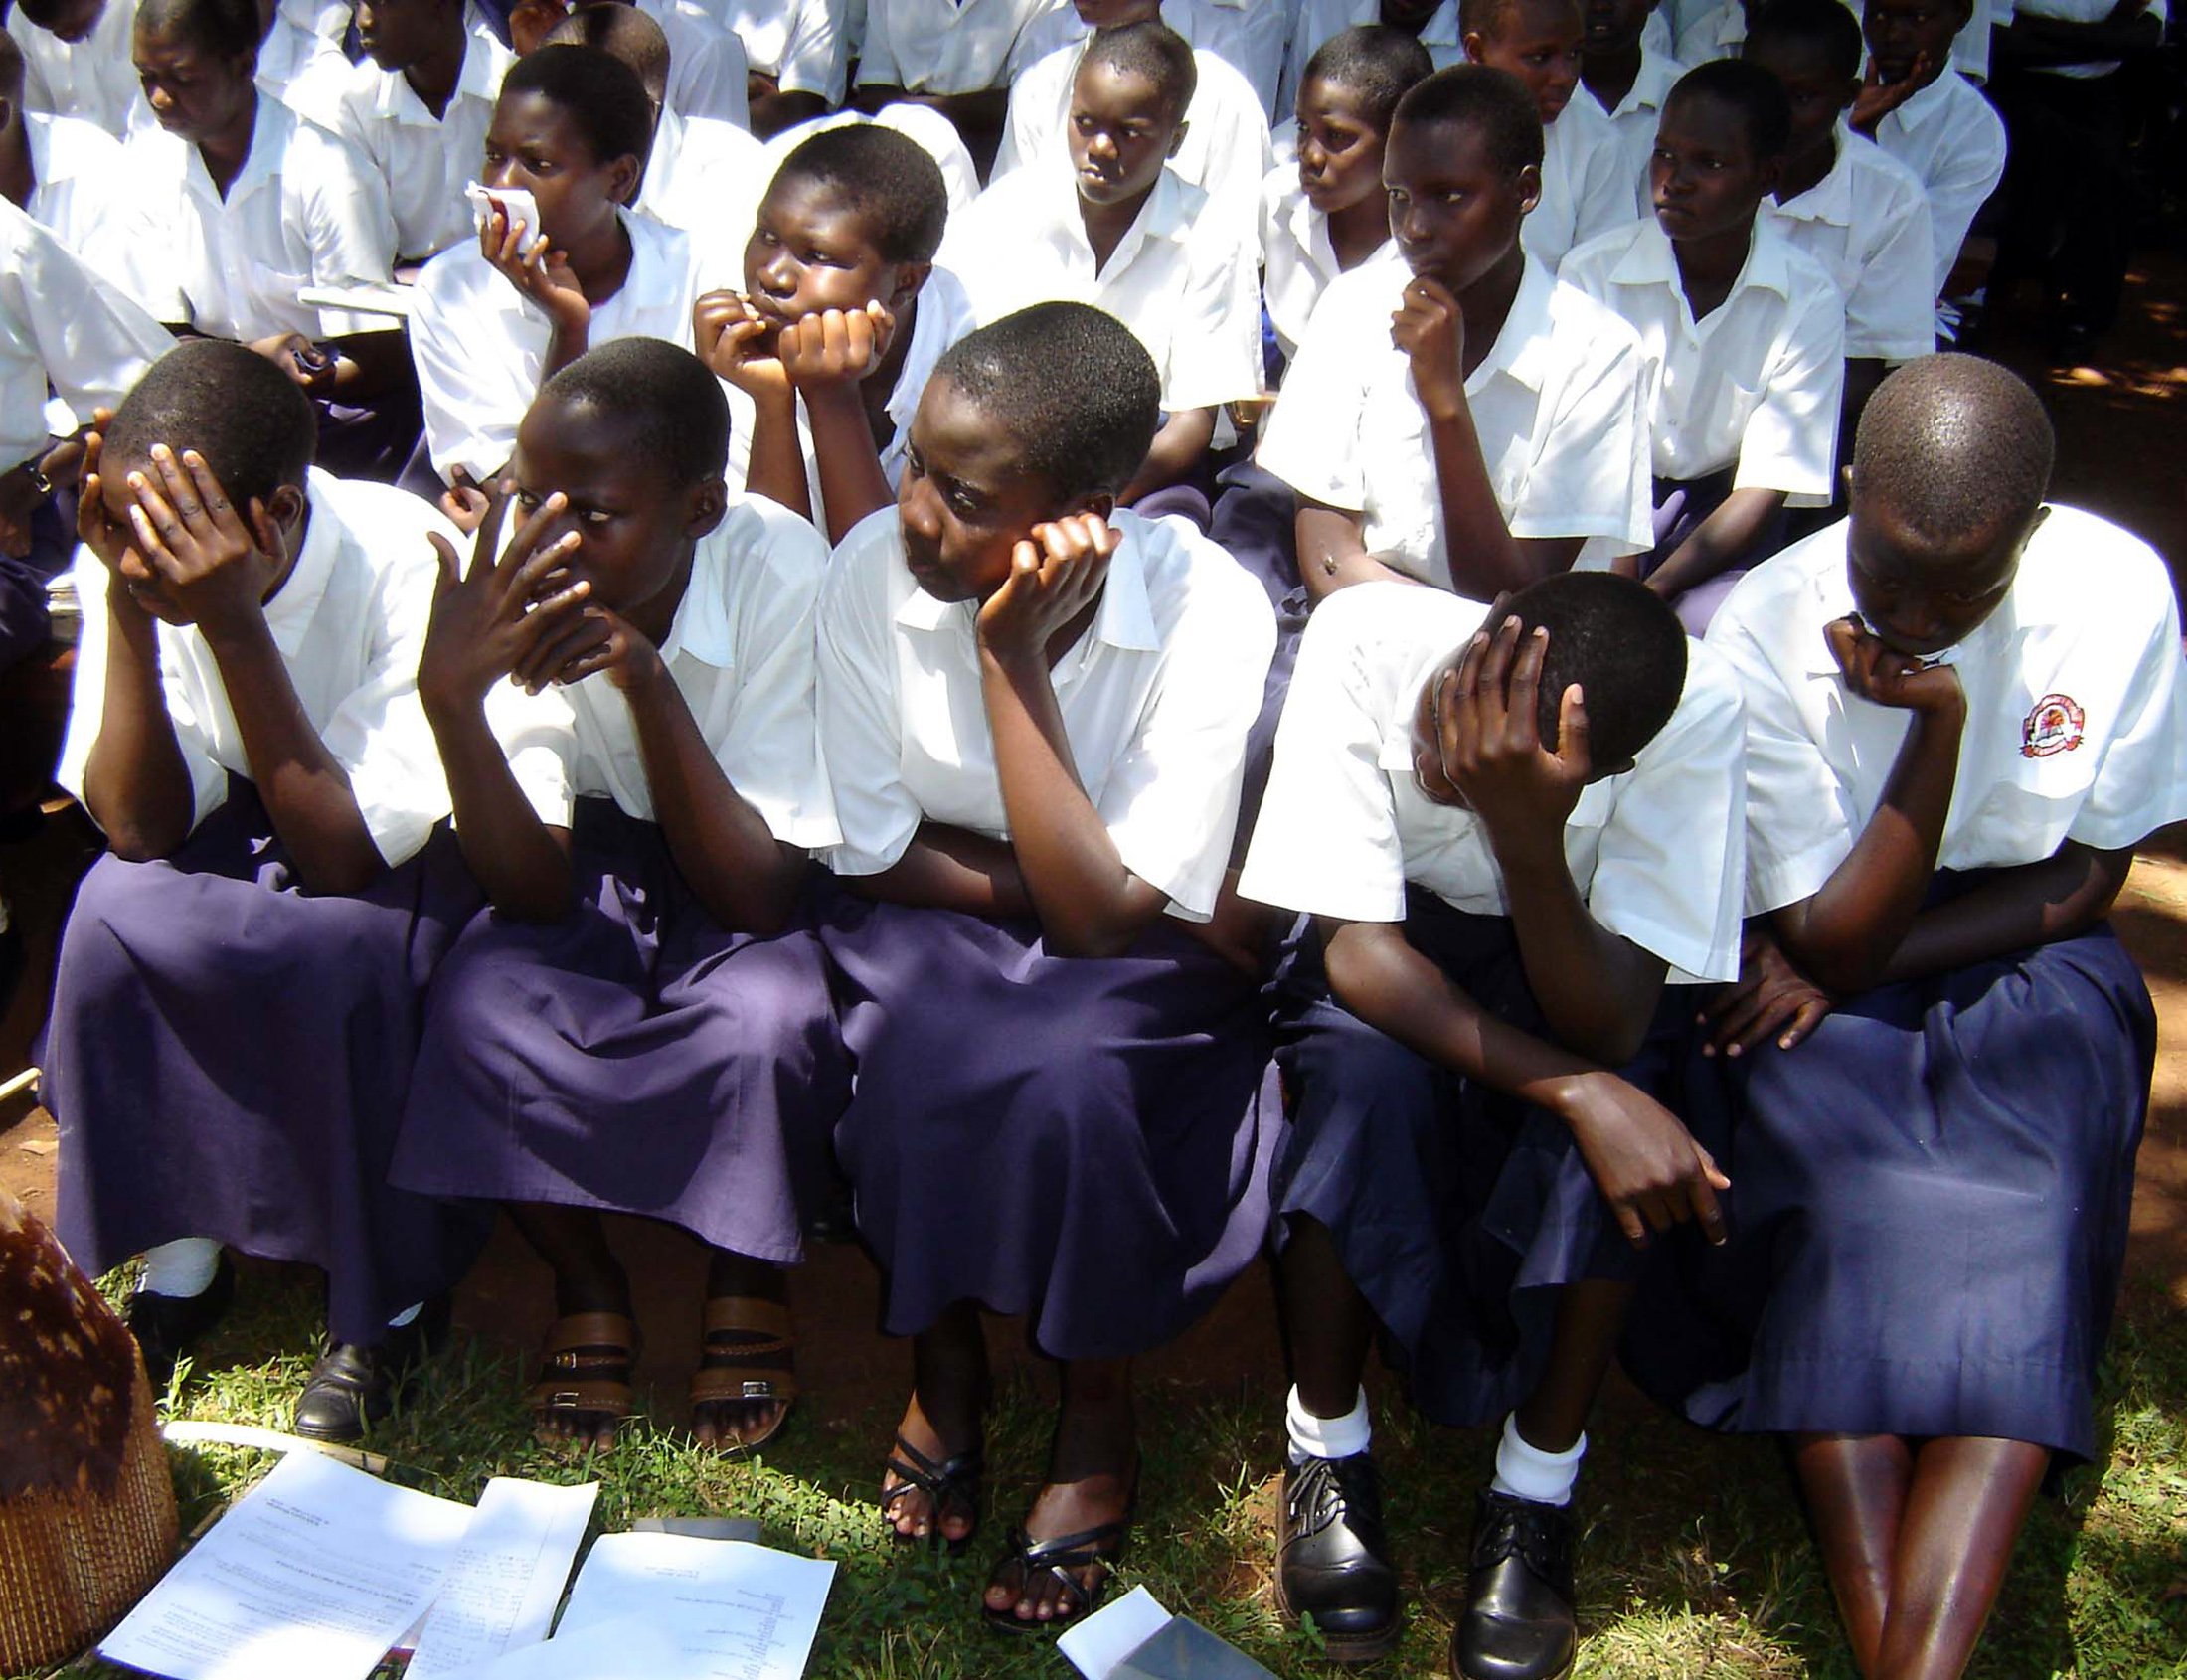 Ugandan students from St. Mary's College in Aboke listen as former abducted girls who returned from captivity by Lord's Resistance Army (LRA) rebels talk about their ordeal during a ceremony October 10, 2005 to commemorate the abduction day . Nine years ago LRA rebels abducted 139 students of St. Mary?s College in Aboke, releasing 109 students when the school?s deputy headmistress Rachele Fassera, an Italian nun, followed the rebels into the bush but retained 30 girls, most of them aged between 14 and 15 years. Twenty-four of the girls have since returned at different times and five are believed to have died. The fate of one is not yet known. Picture taken October 10, 2005. REUTERS/Hudson Apunyo - RTR196Y8